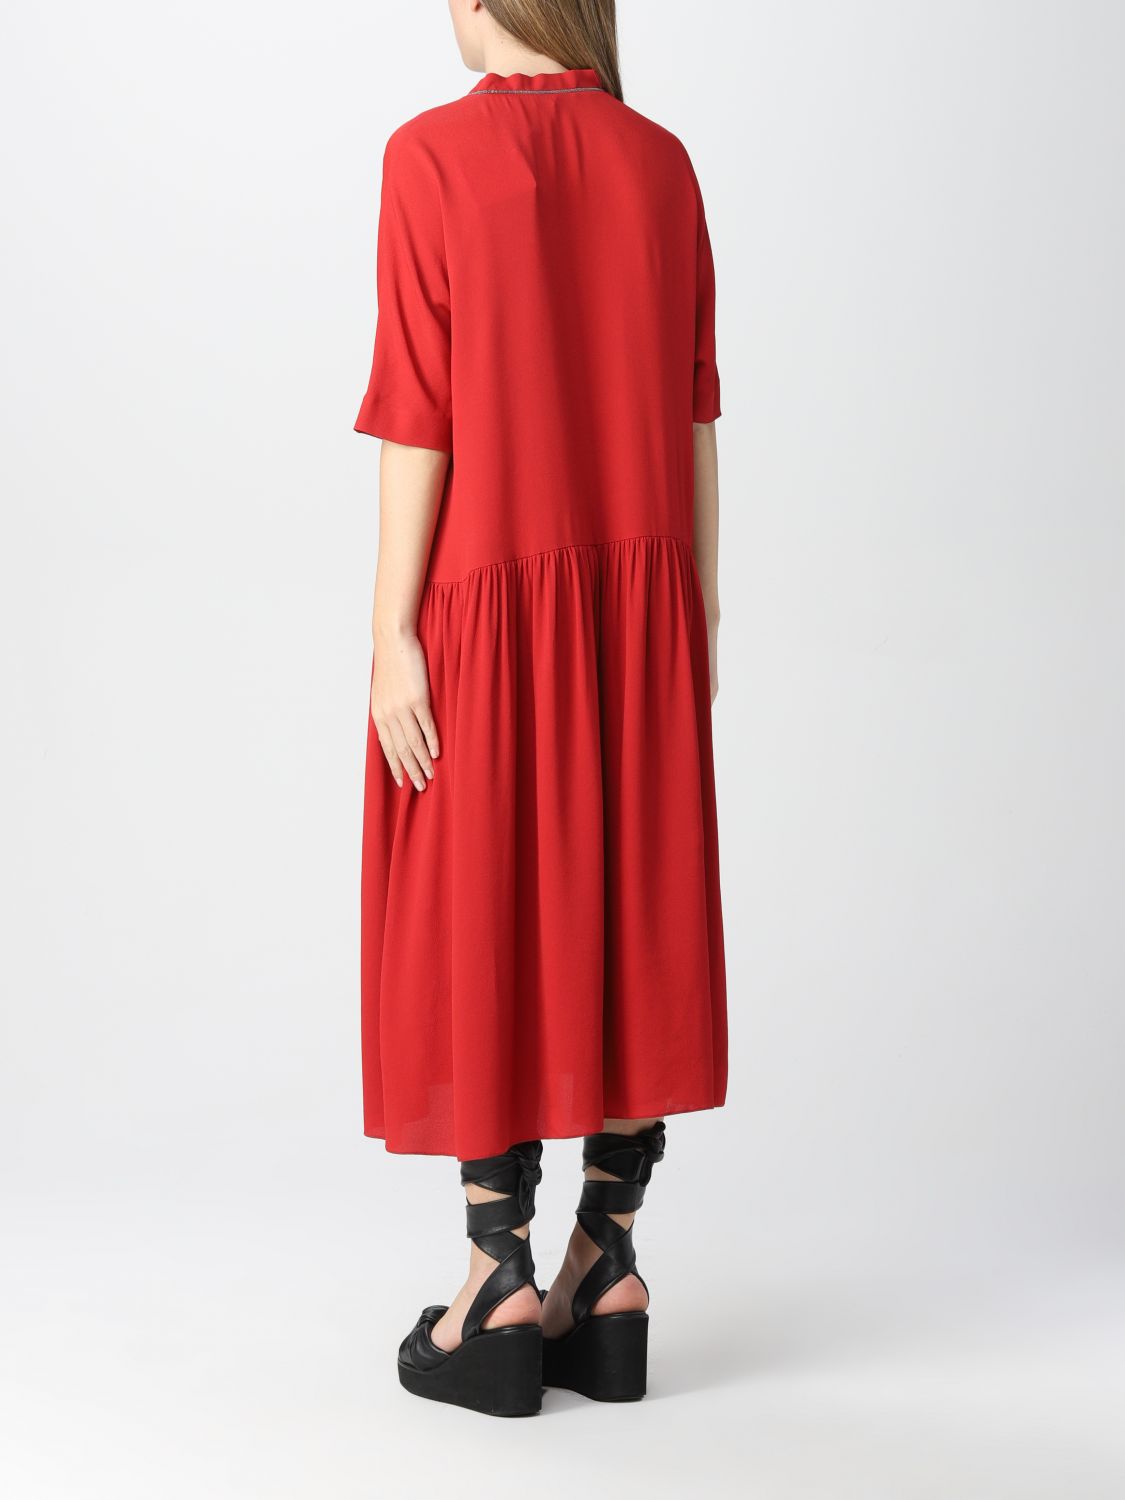 Robes Fabiana Filippi: Robes Fabiana Filippi femme rouge 2